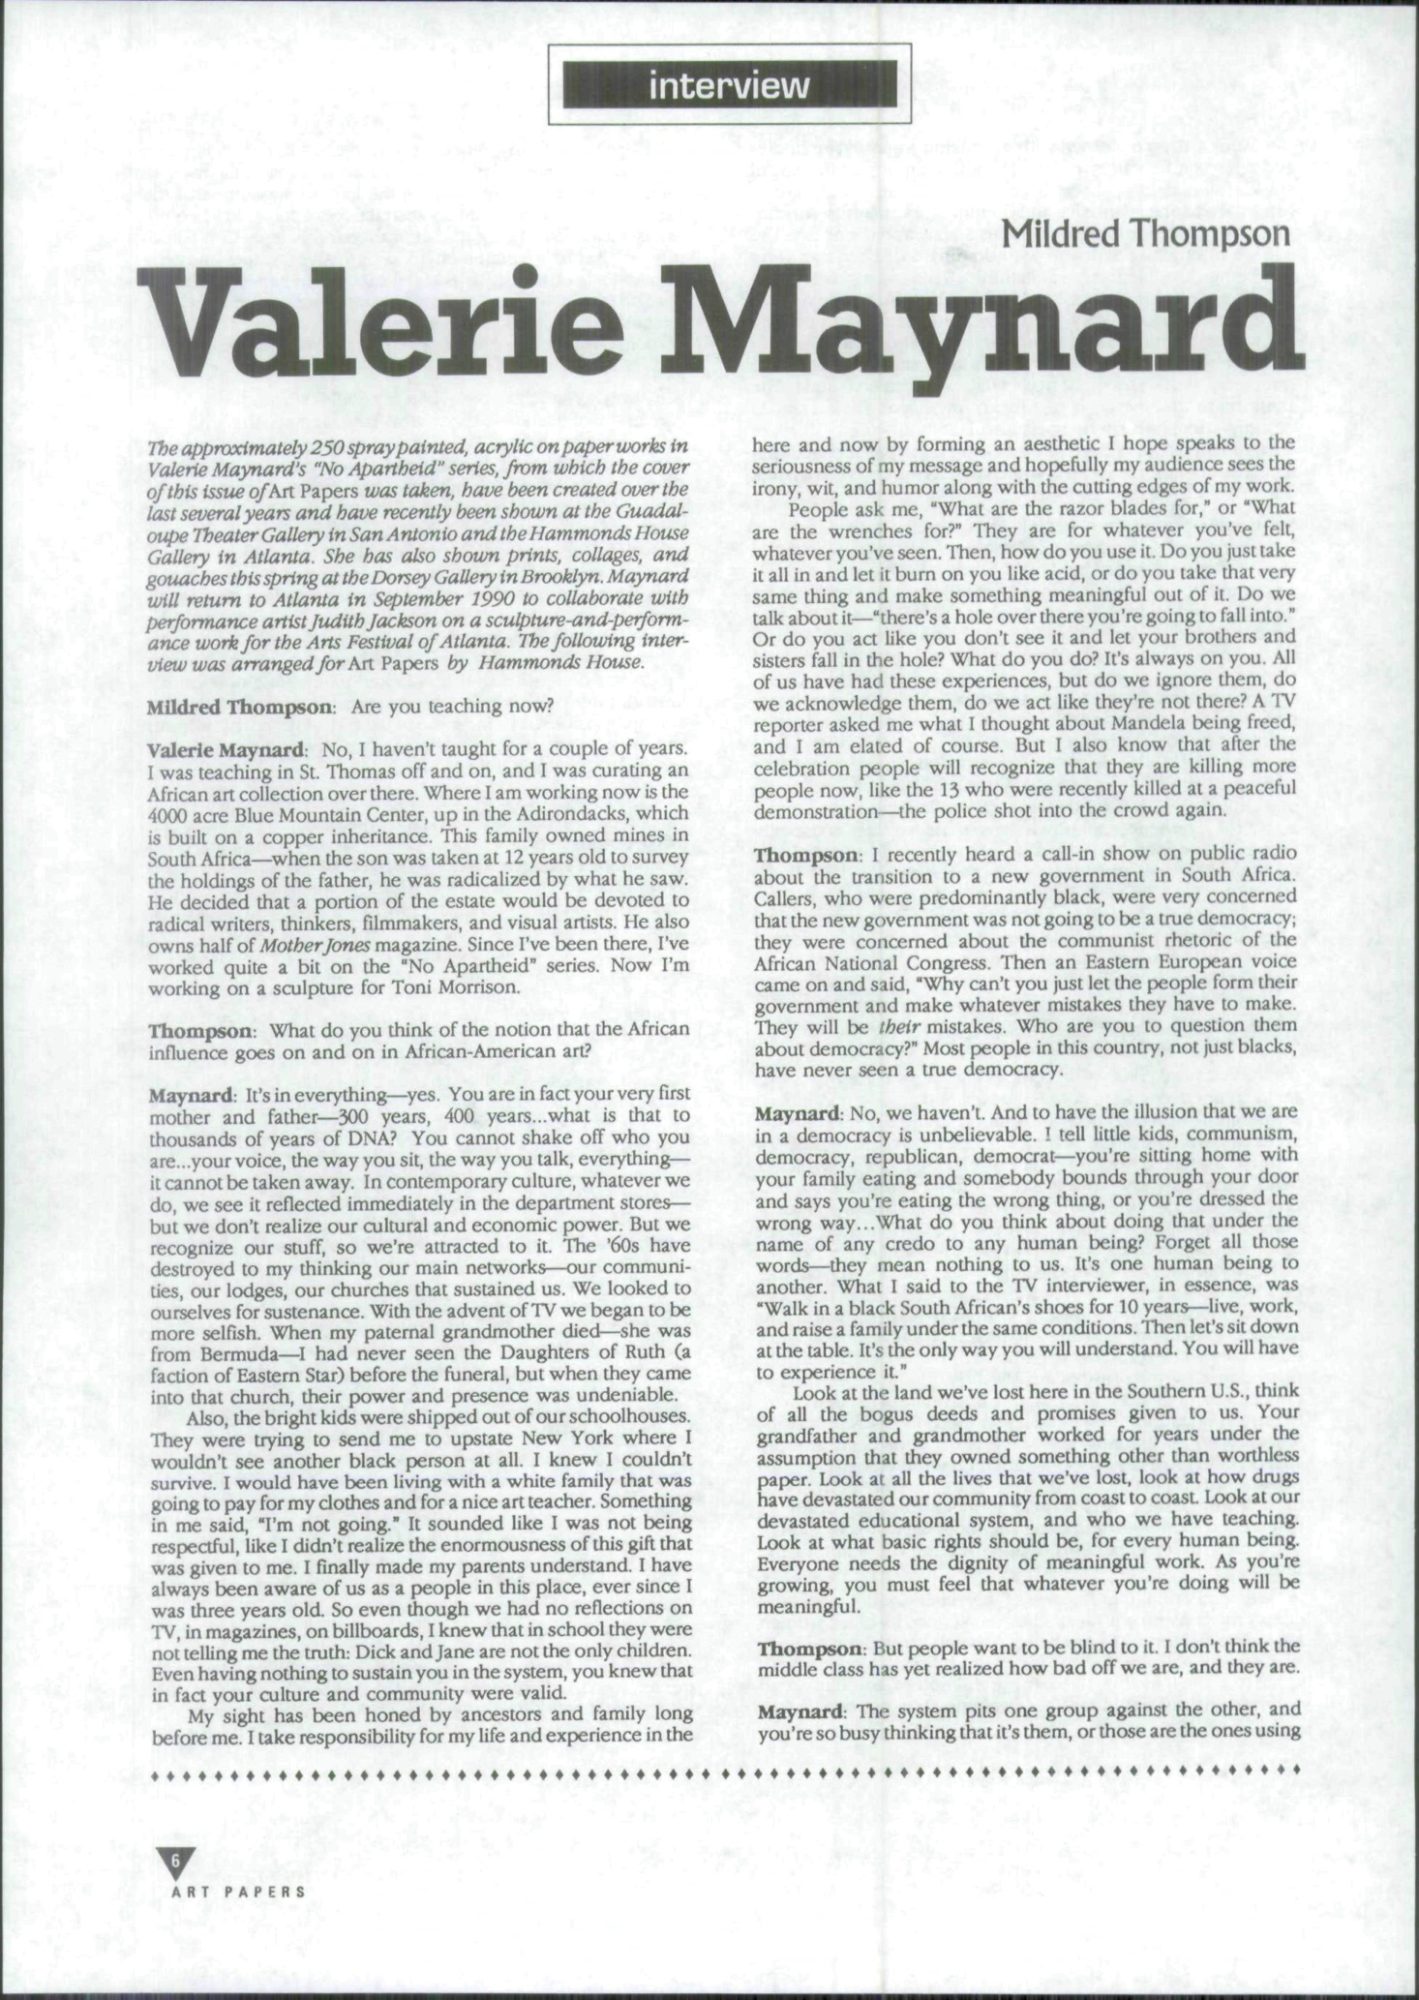 Scan of an interview between Mildred Thompson and Valerie Maynard.